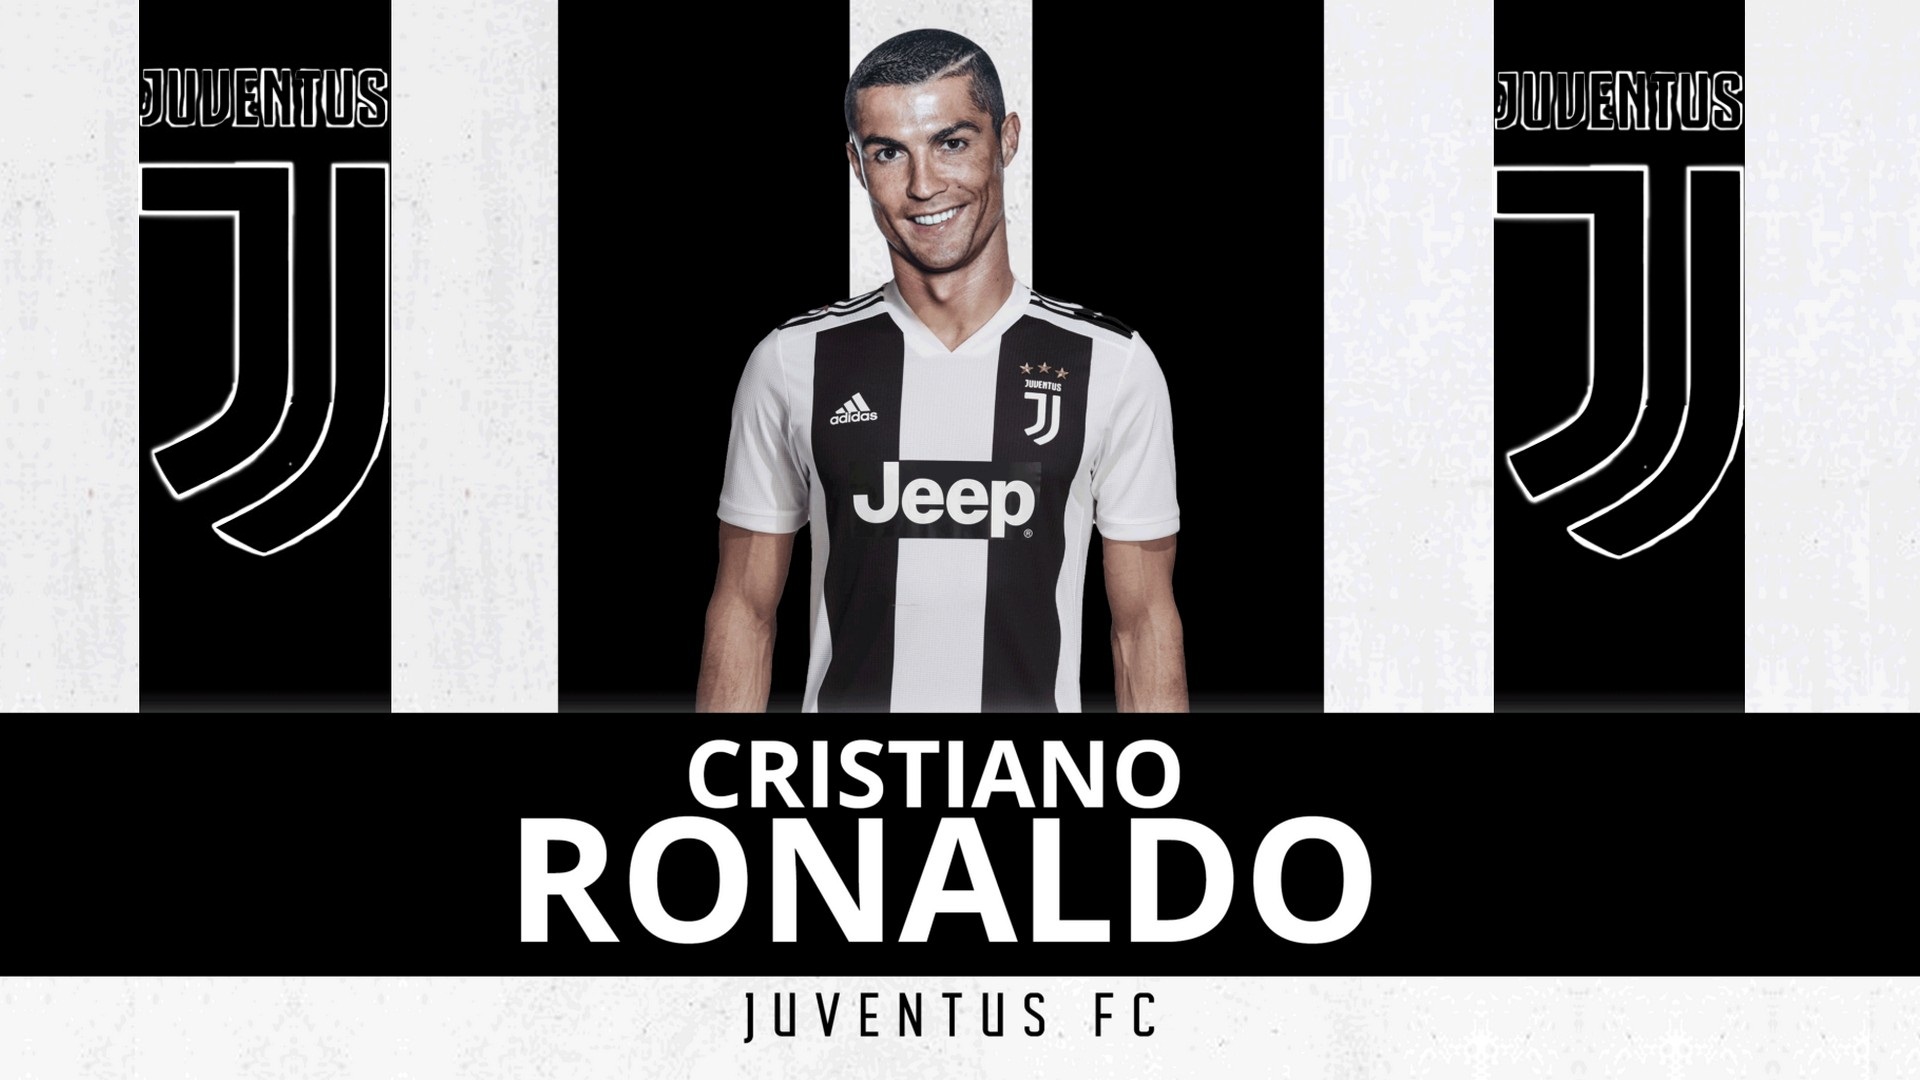 Wallpapers Cristiano Ronaldo Juventus With Resolution 1920X1080 pixel. You can make this wallpaper for your Mac or Windows Desktop Background, iPhone, Android or Tablet and another Smartphone device for free